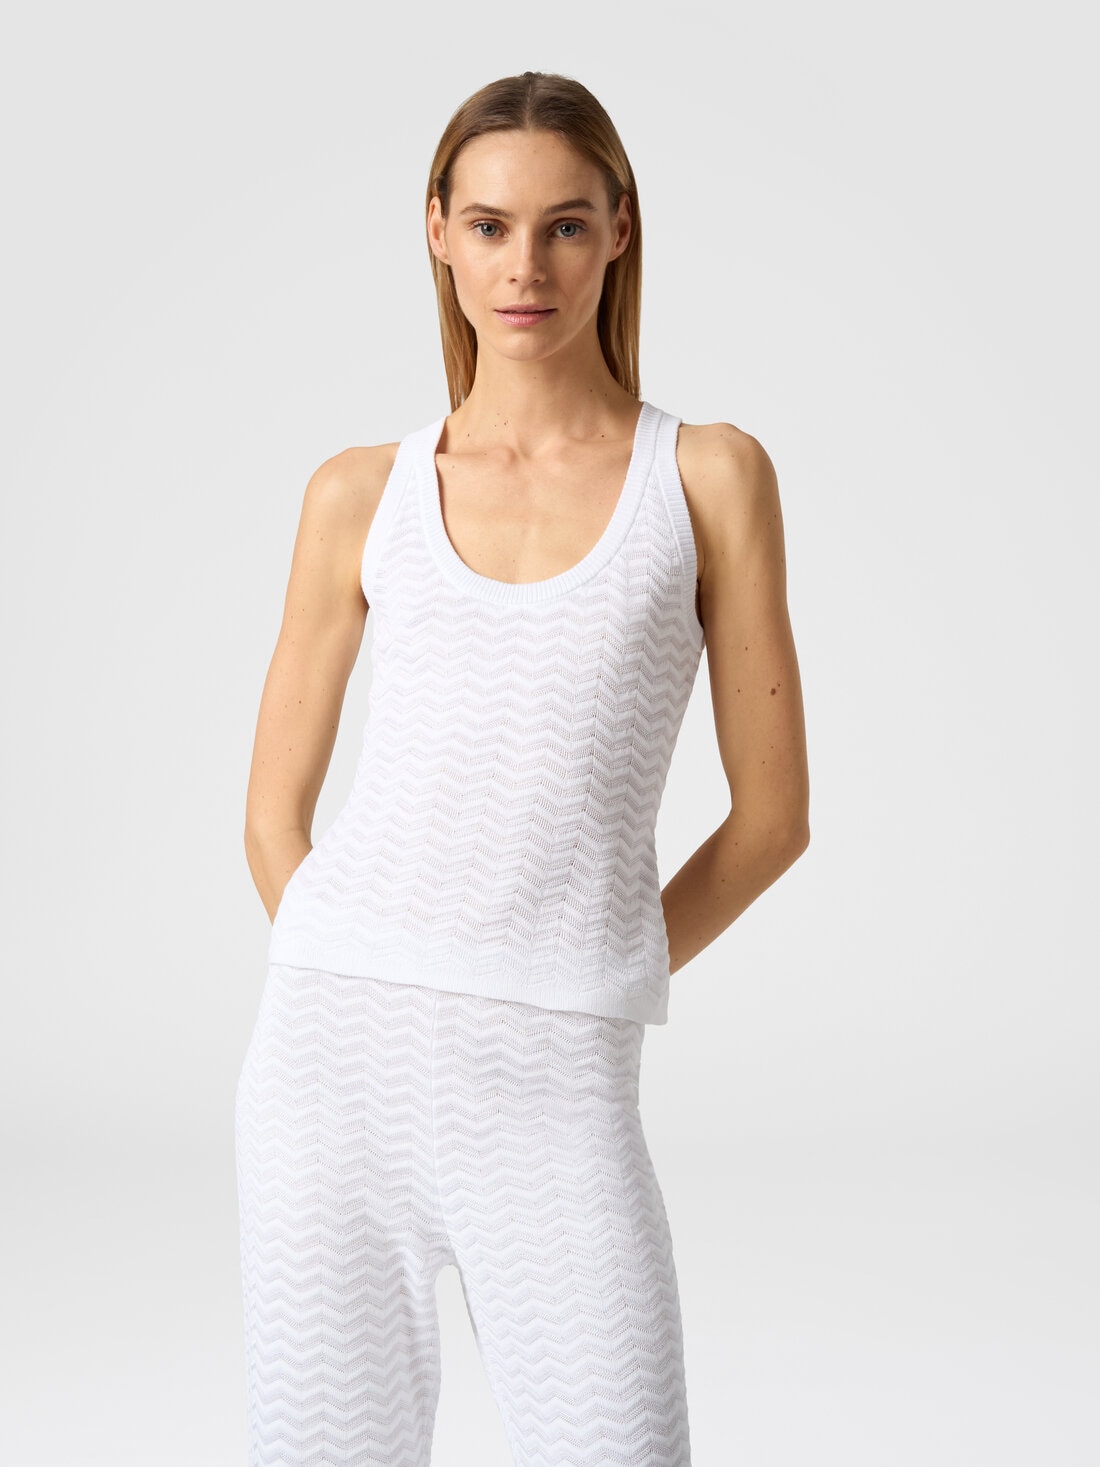 Tank top in chevron cotton and viscose knit, White  - DS24SK11BK033W14001 - 4